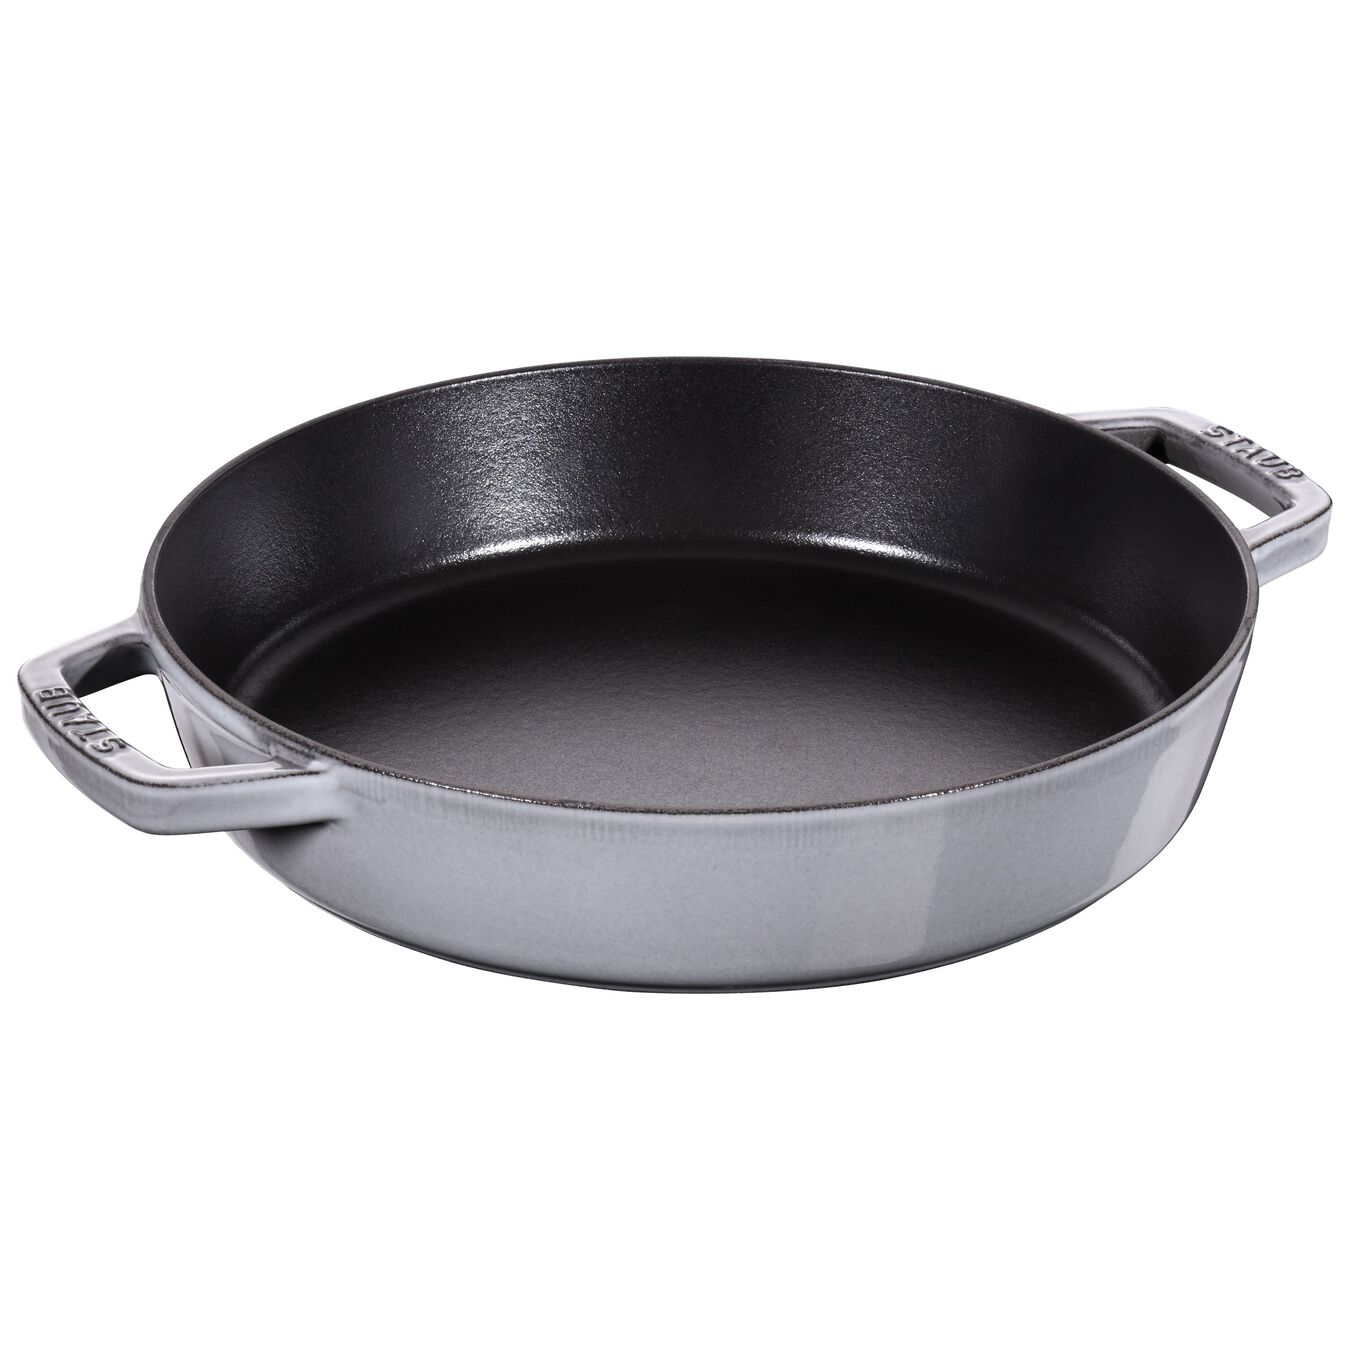 26 cm / 10 inch cast iron Frying pan, graphite-grey,,large 1